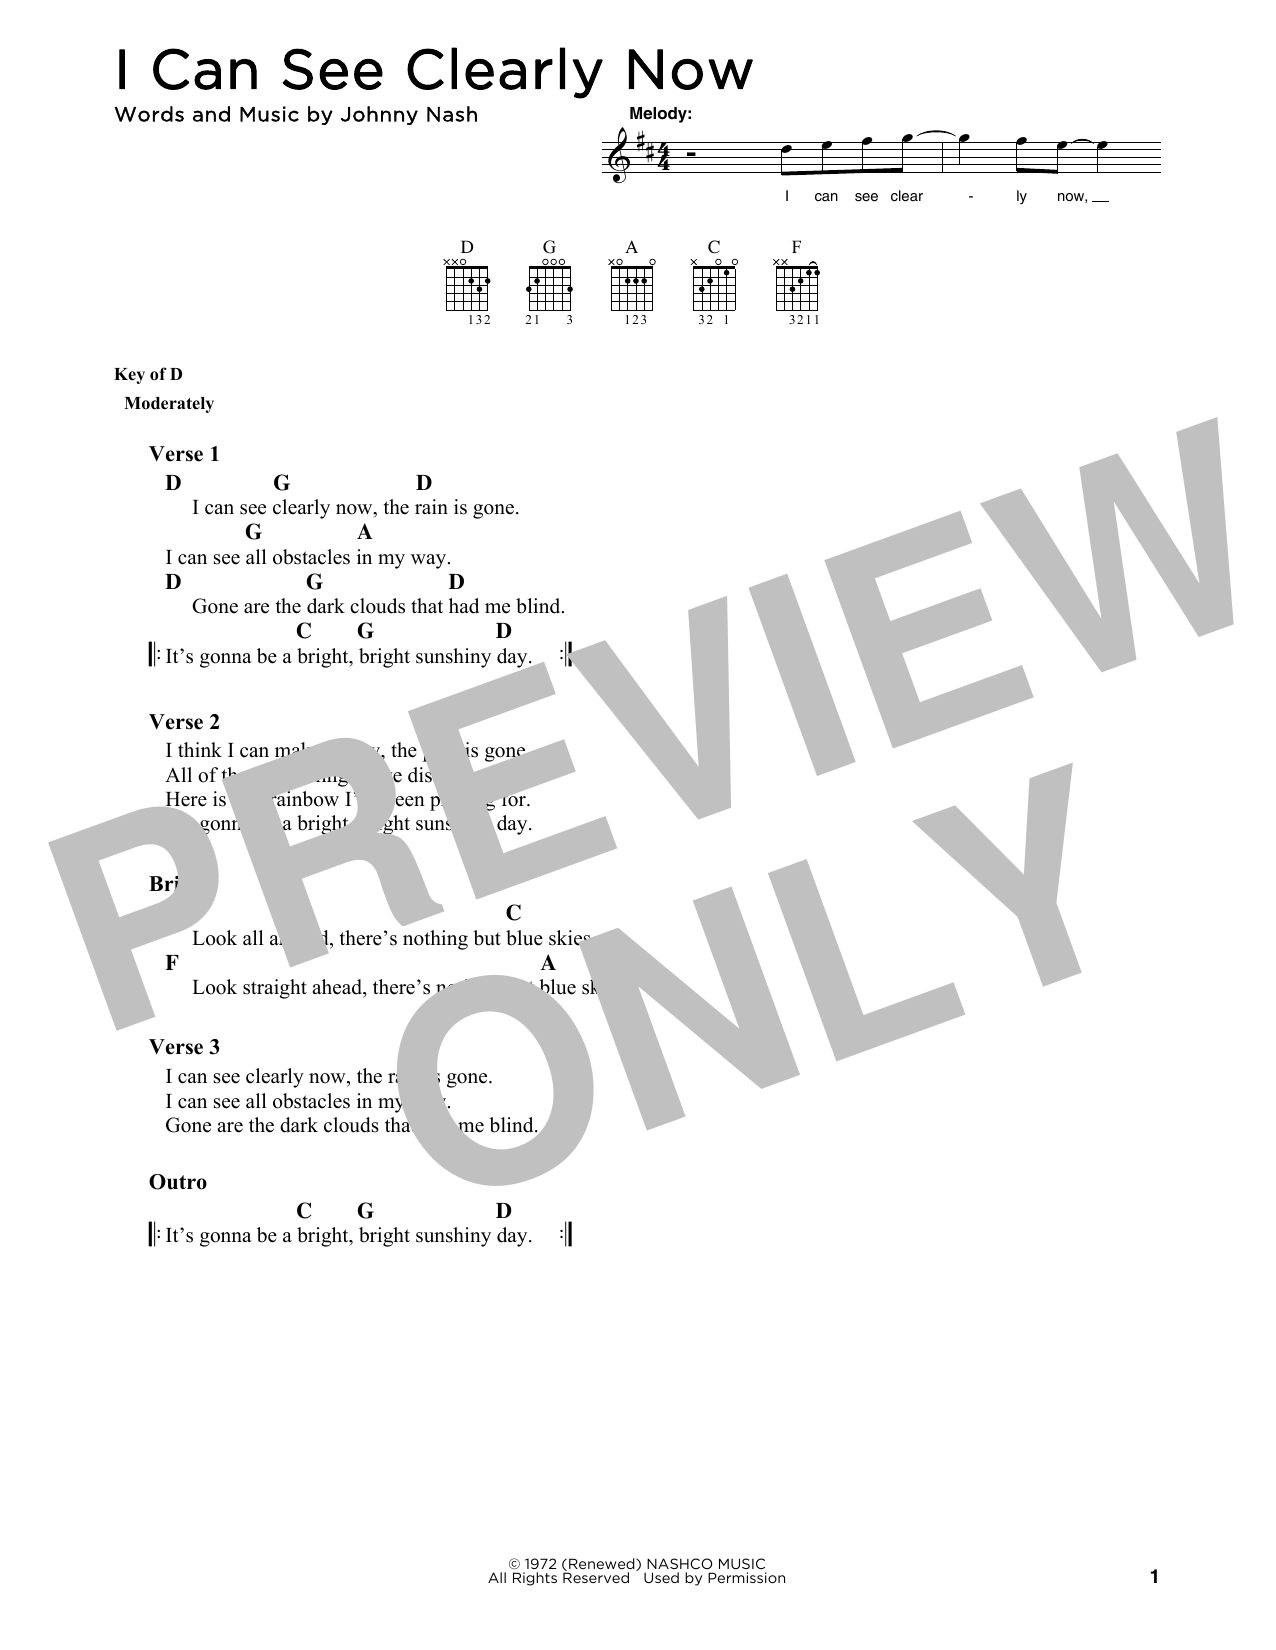 Download Johnny Nash I Can See Clearly Now Sheet Music